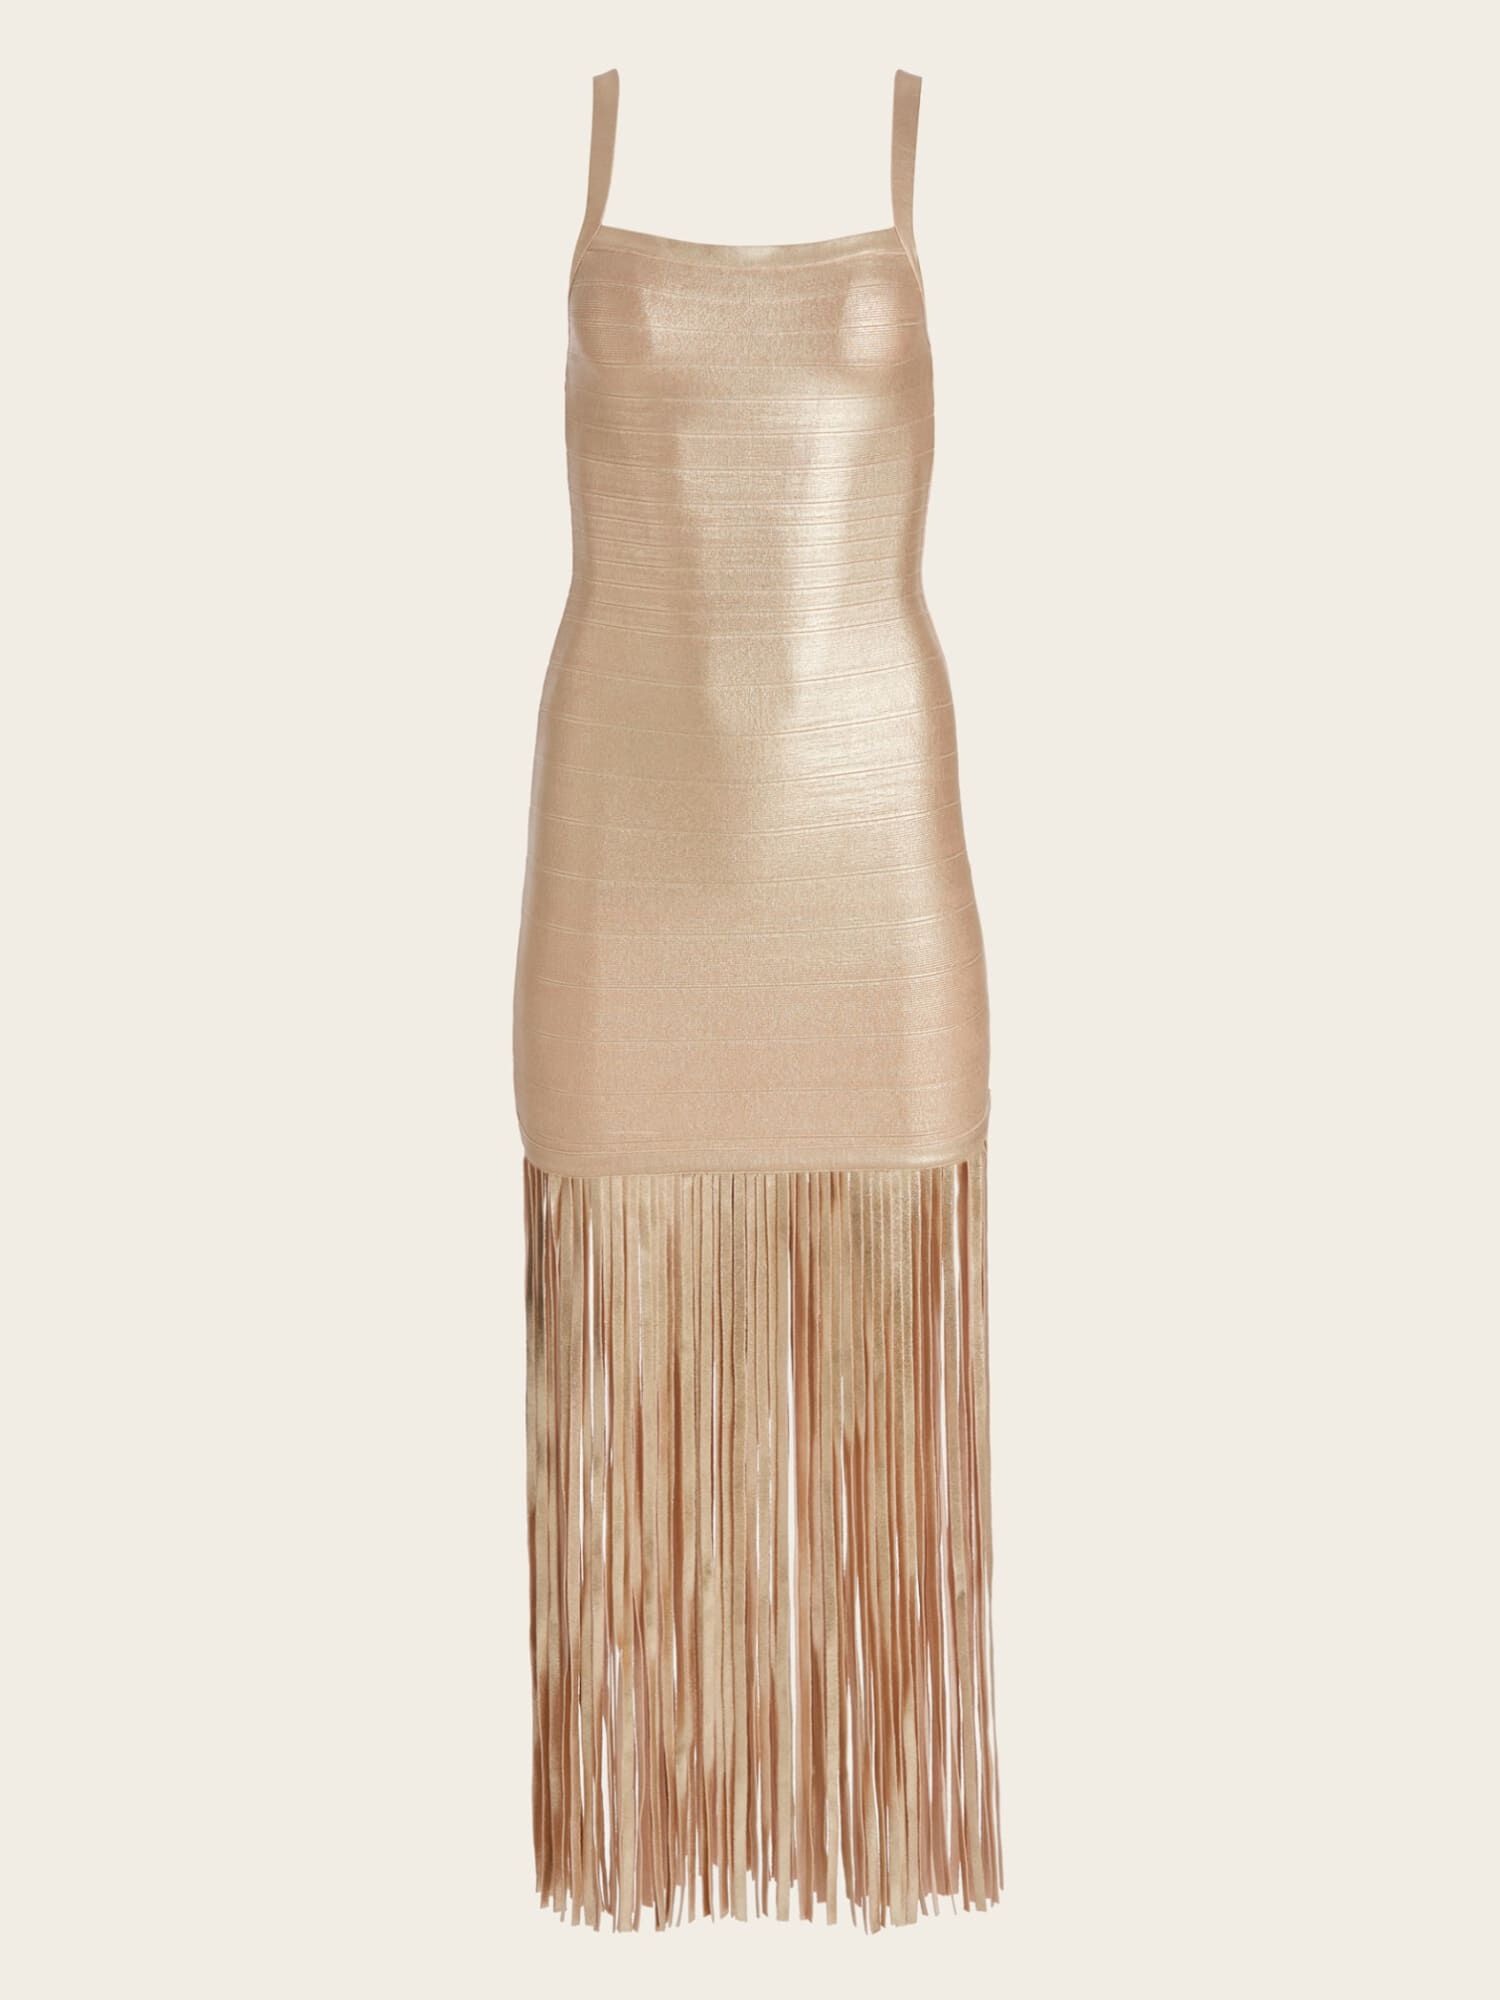 Shop GUESS Online Marciano fringes dress